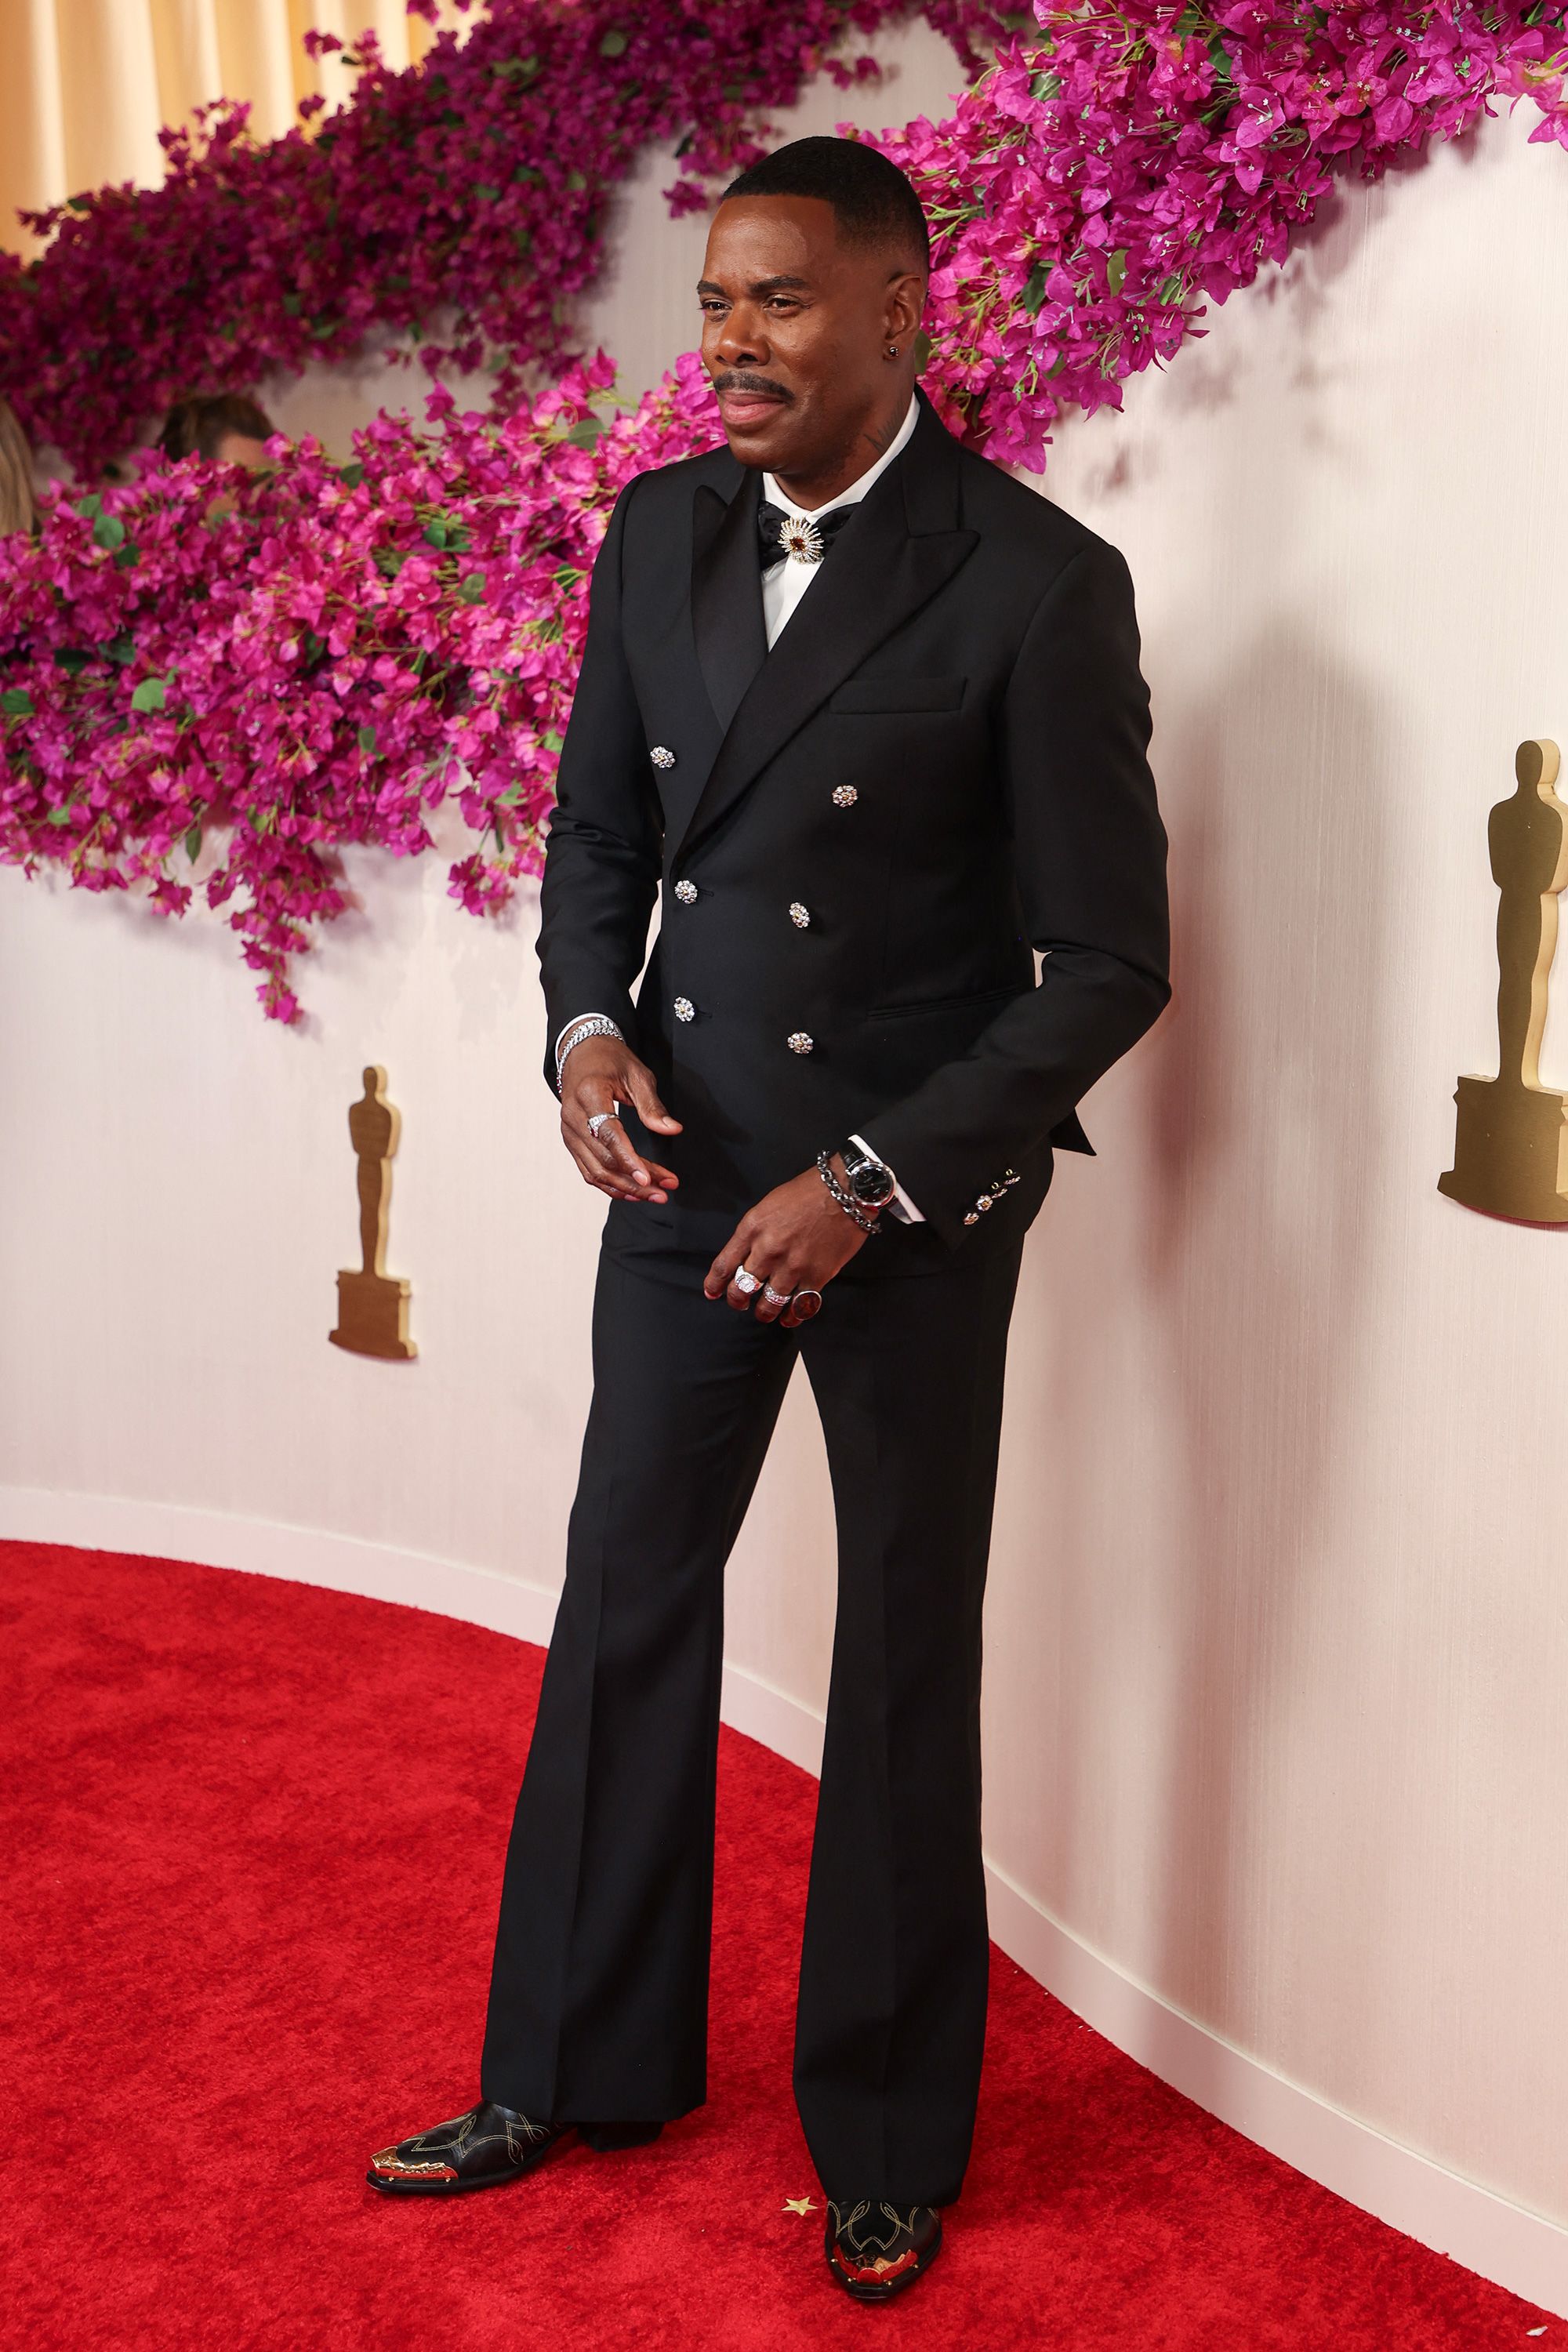 Best Actor nominee Colman Domingo wore a black Louis Vuitton double-breasted suit with a statement bow tie and David Yurman jewelry. 